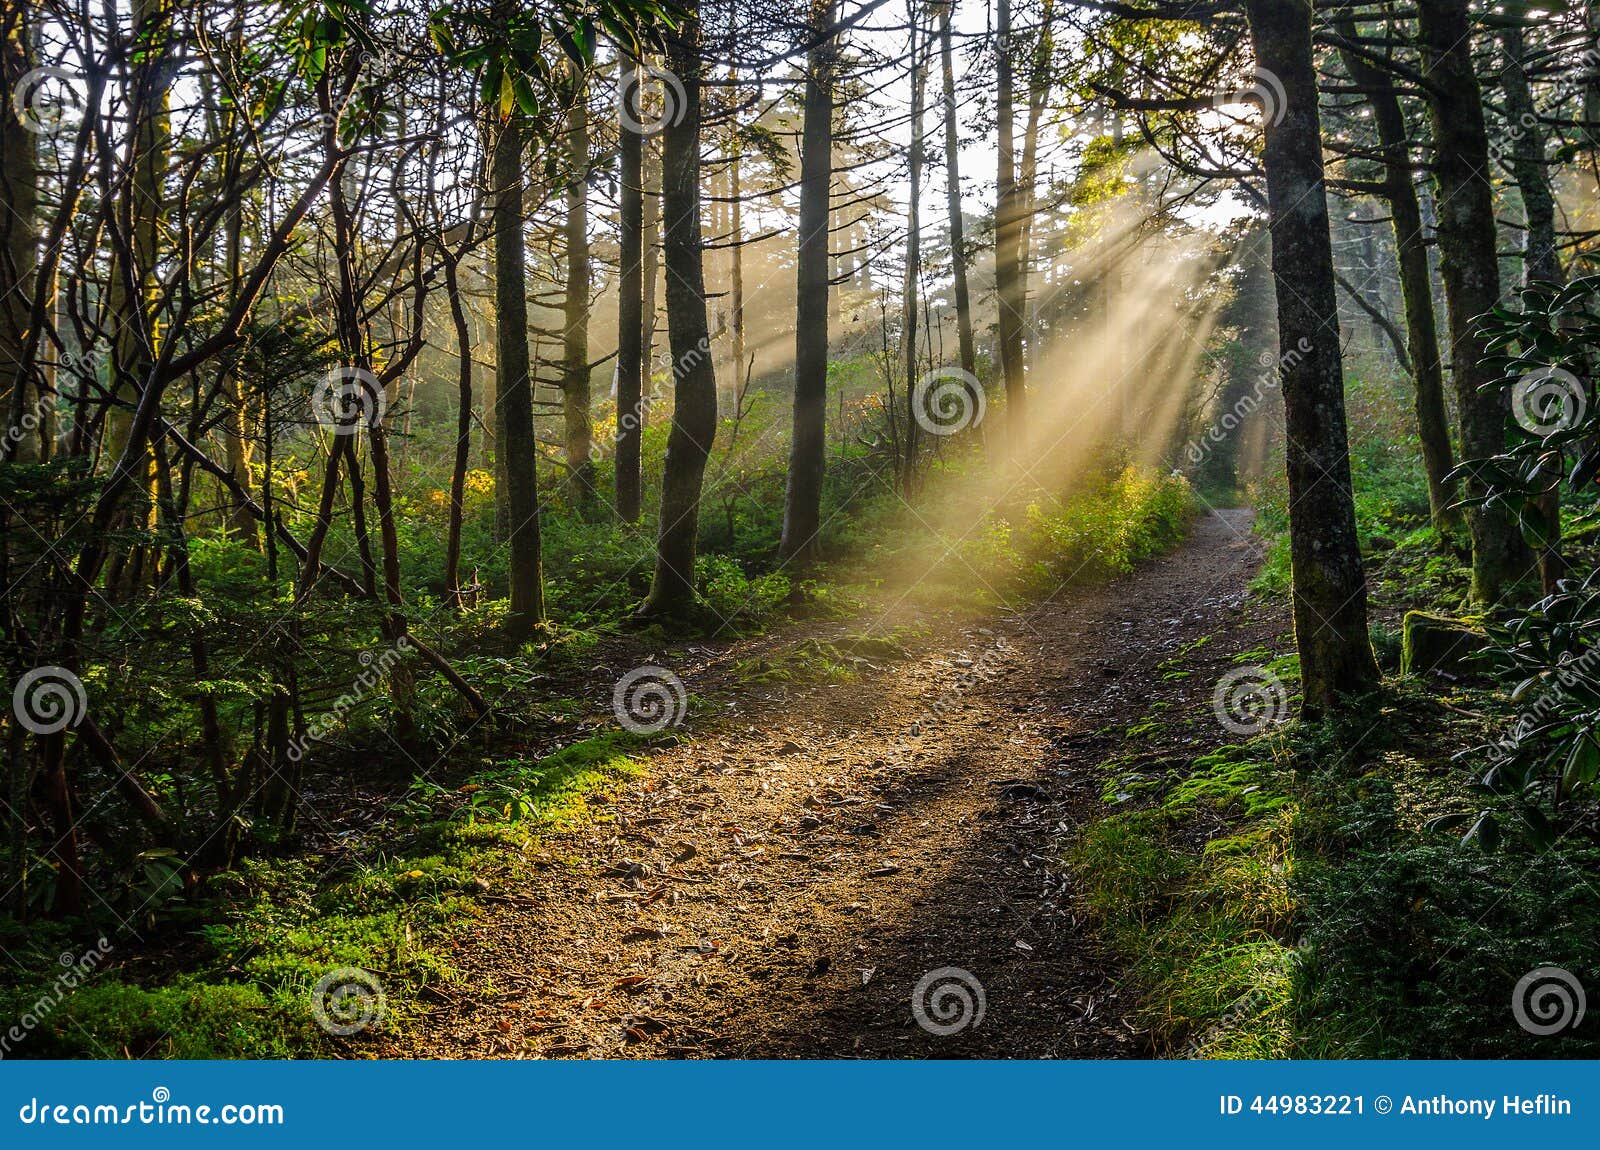 roan mountain, crepuscular rays, tennessee forest